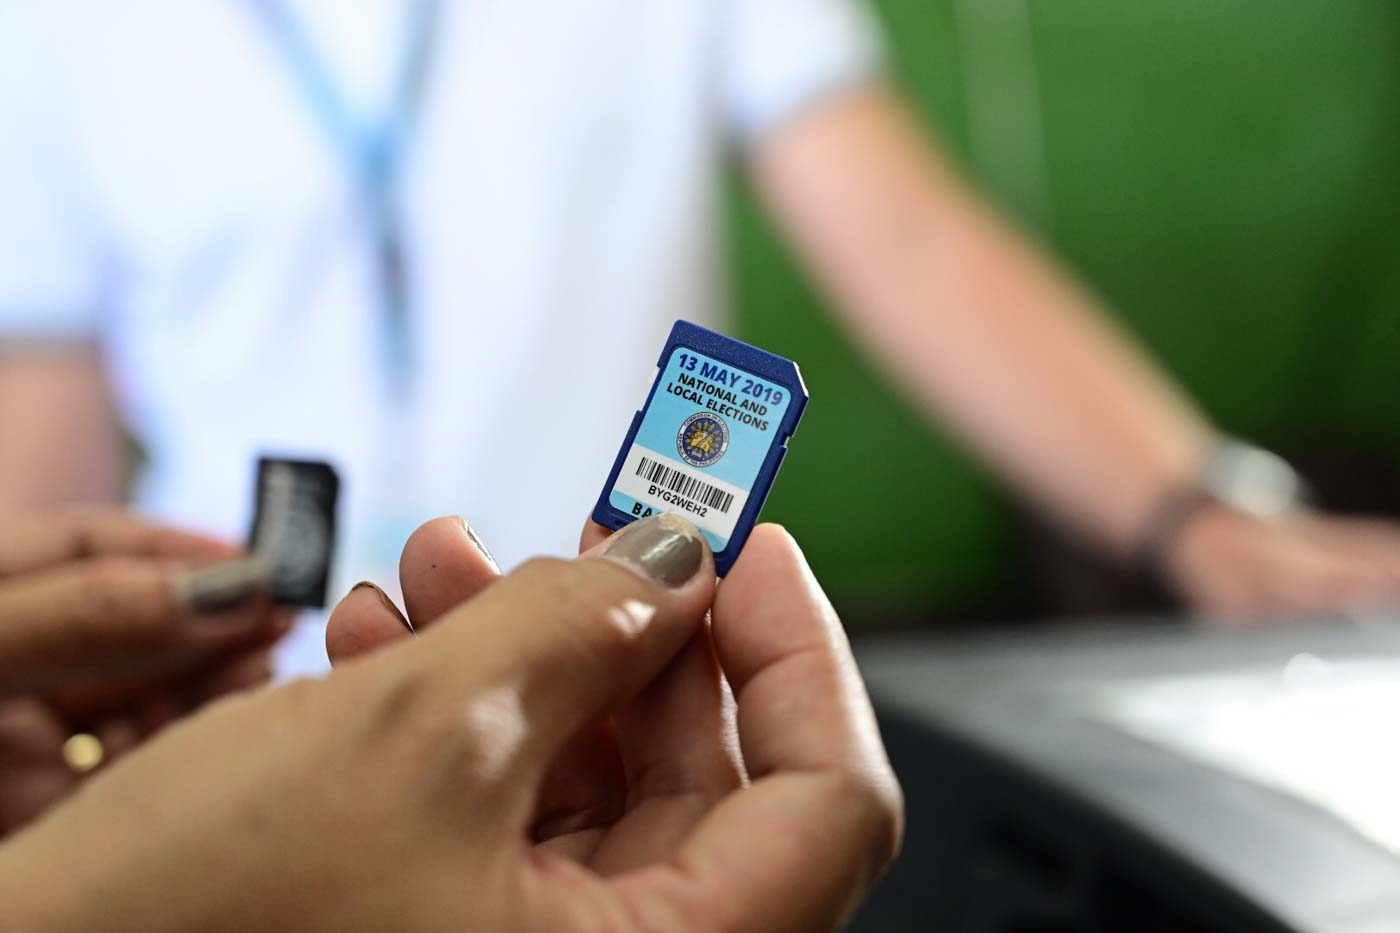 1,000 SD cards didn’t work in May 13 polls – Comelec